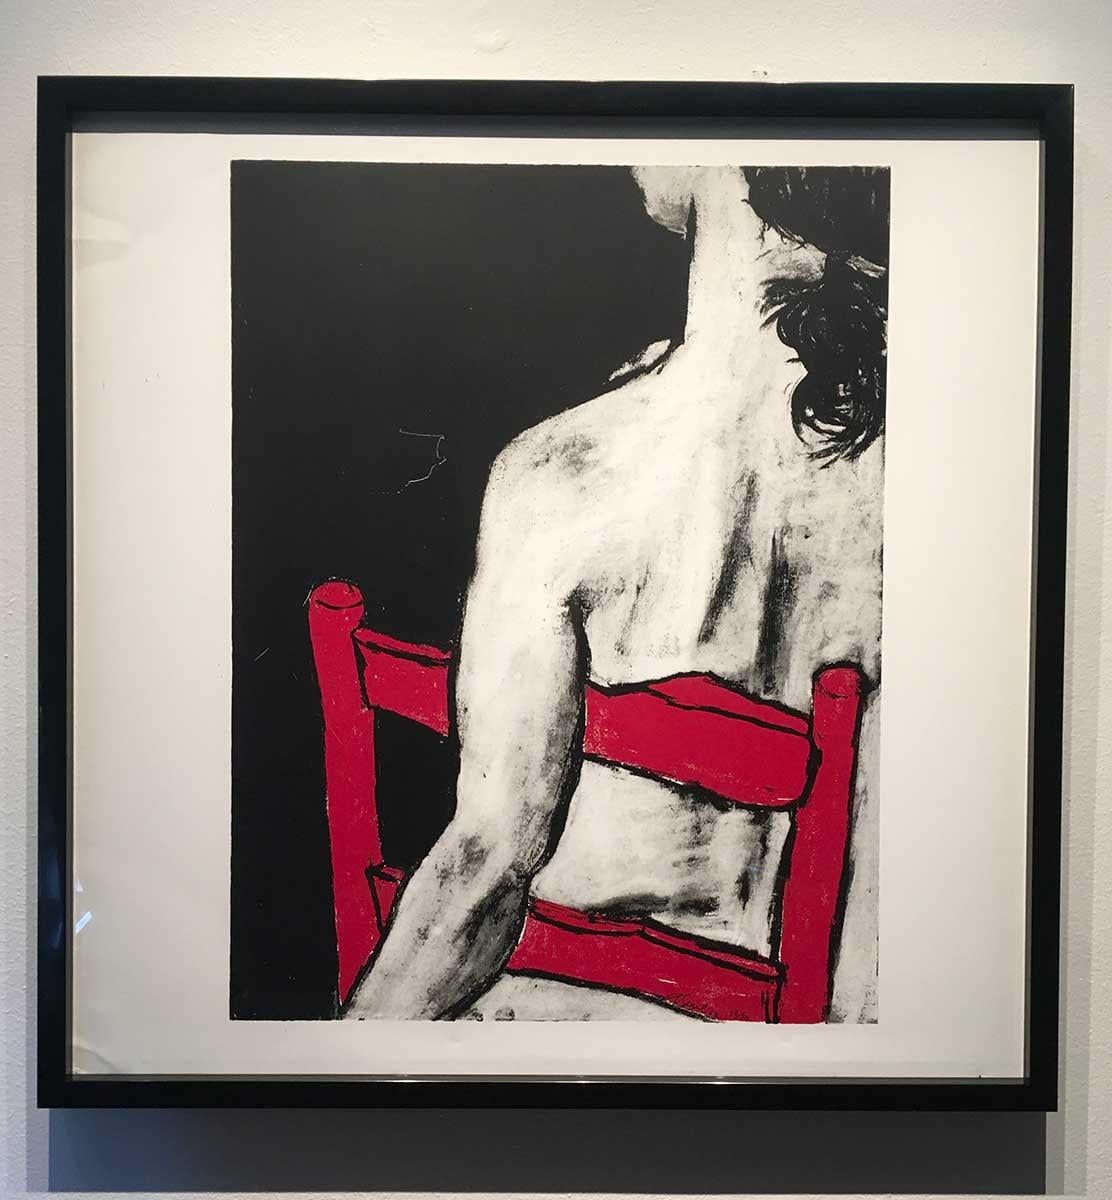 George Segal Figurative Print - 'Girl Seated on Red Chair', by George Regal, Screen Print on Metal